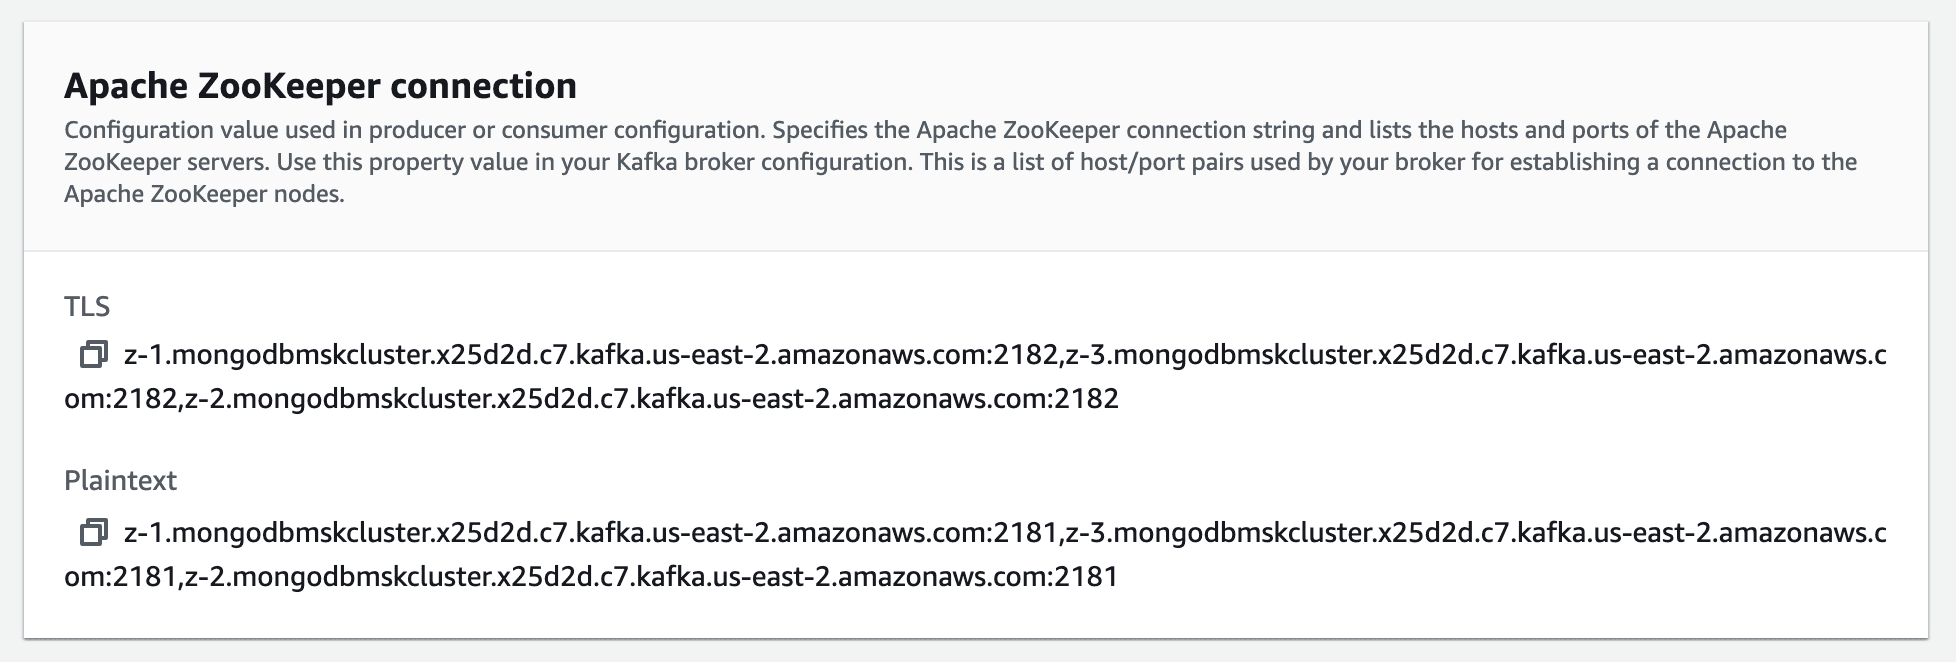 Figure 7. Apache ZooKeeper connection